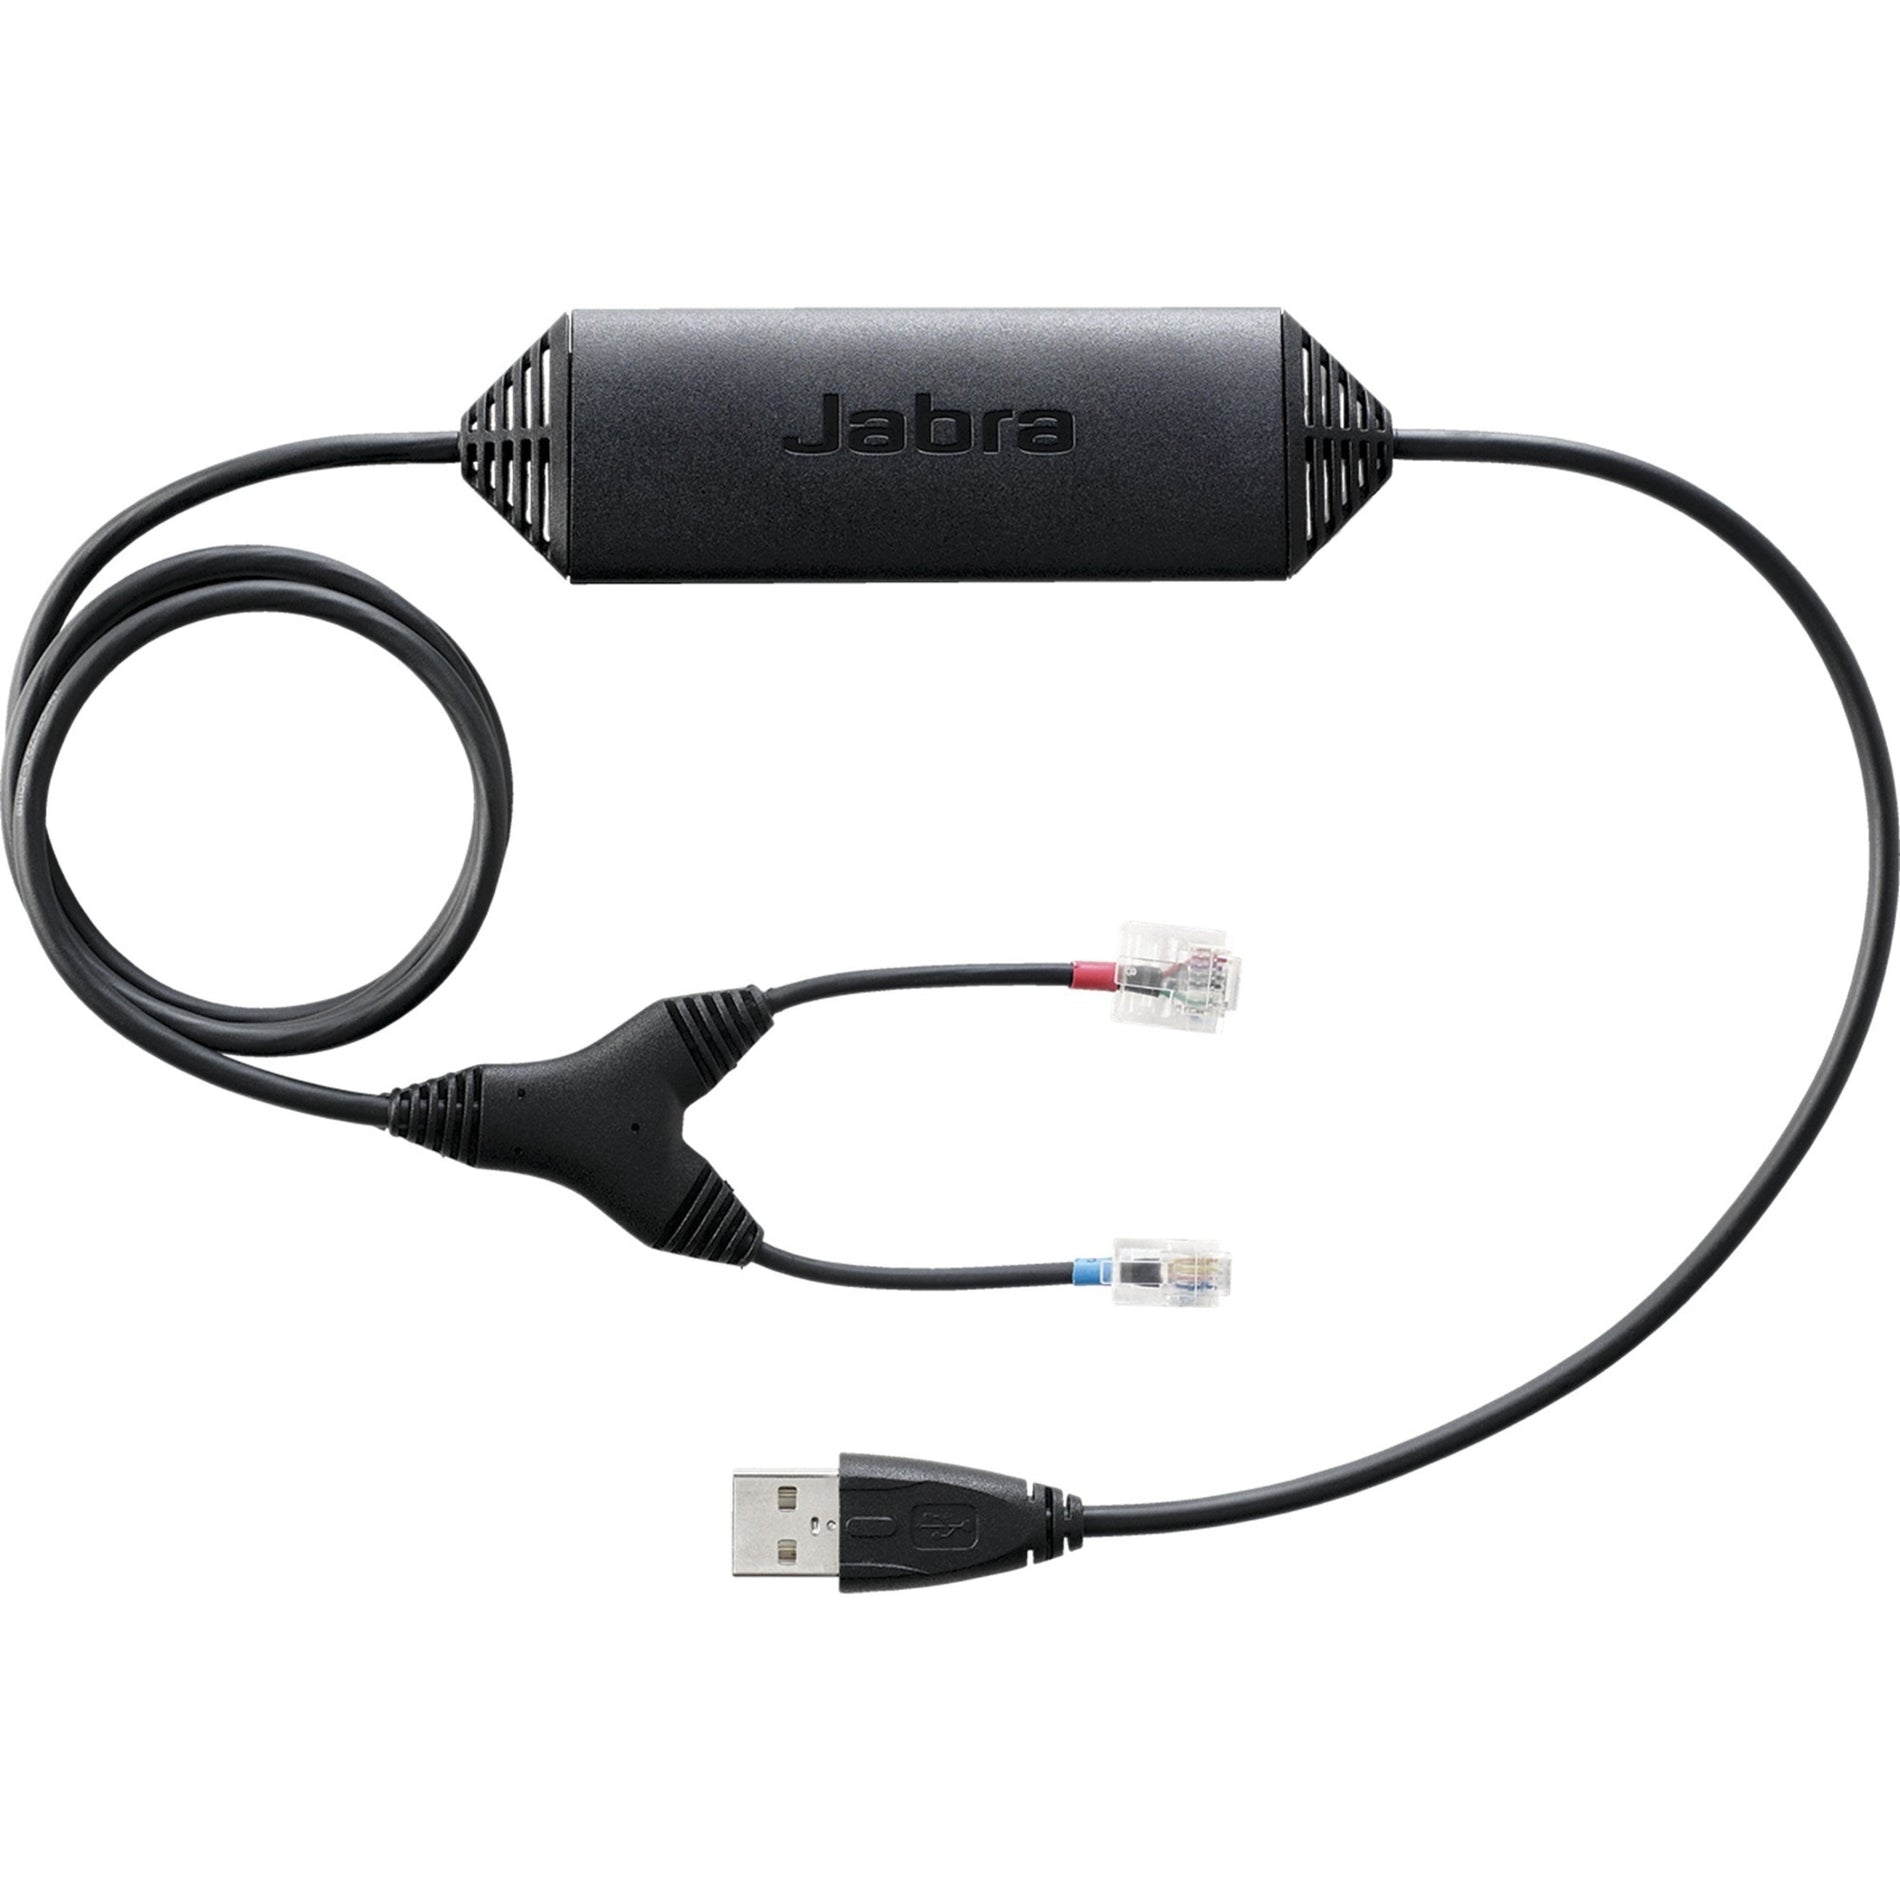 Jabra 14201-30 Electronic Hook Switch USB Microphone, Volume Control, One Touch Call Answer